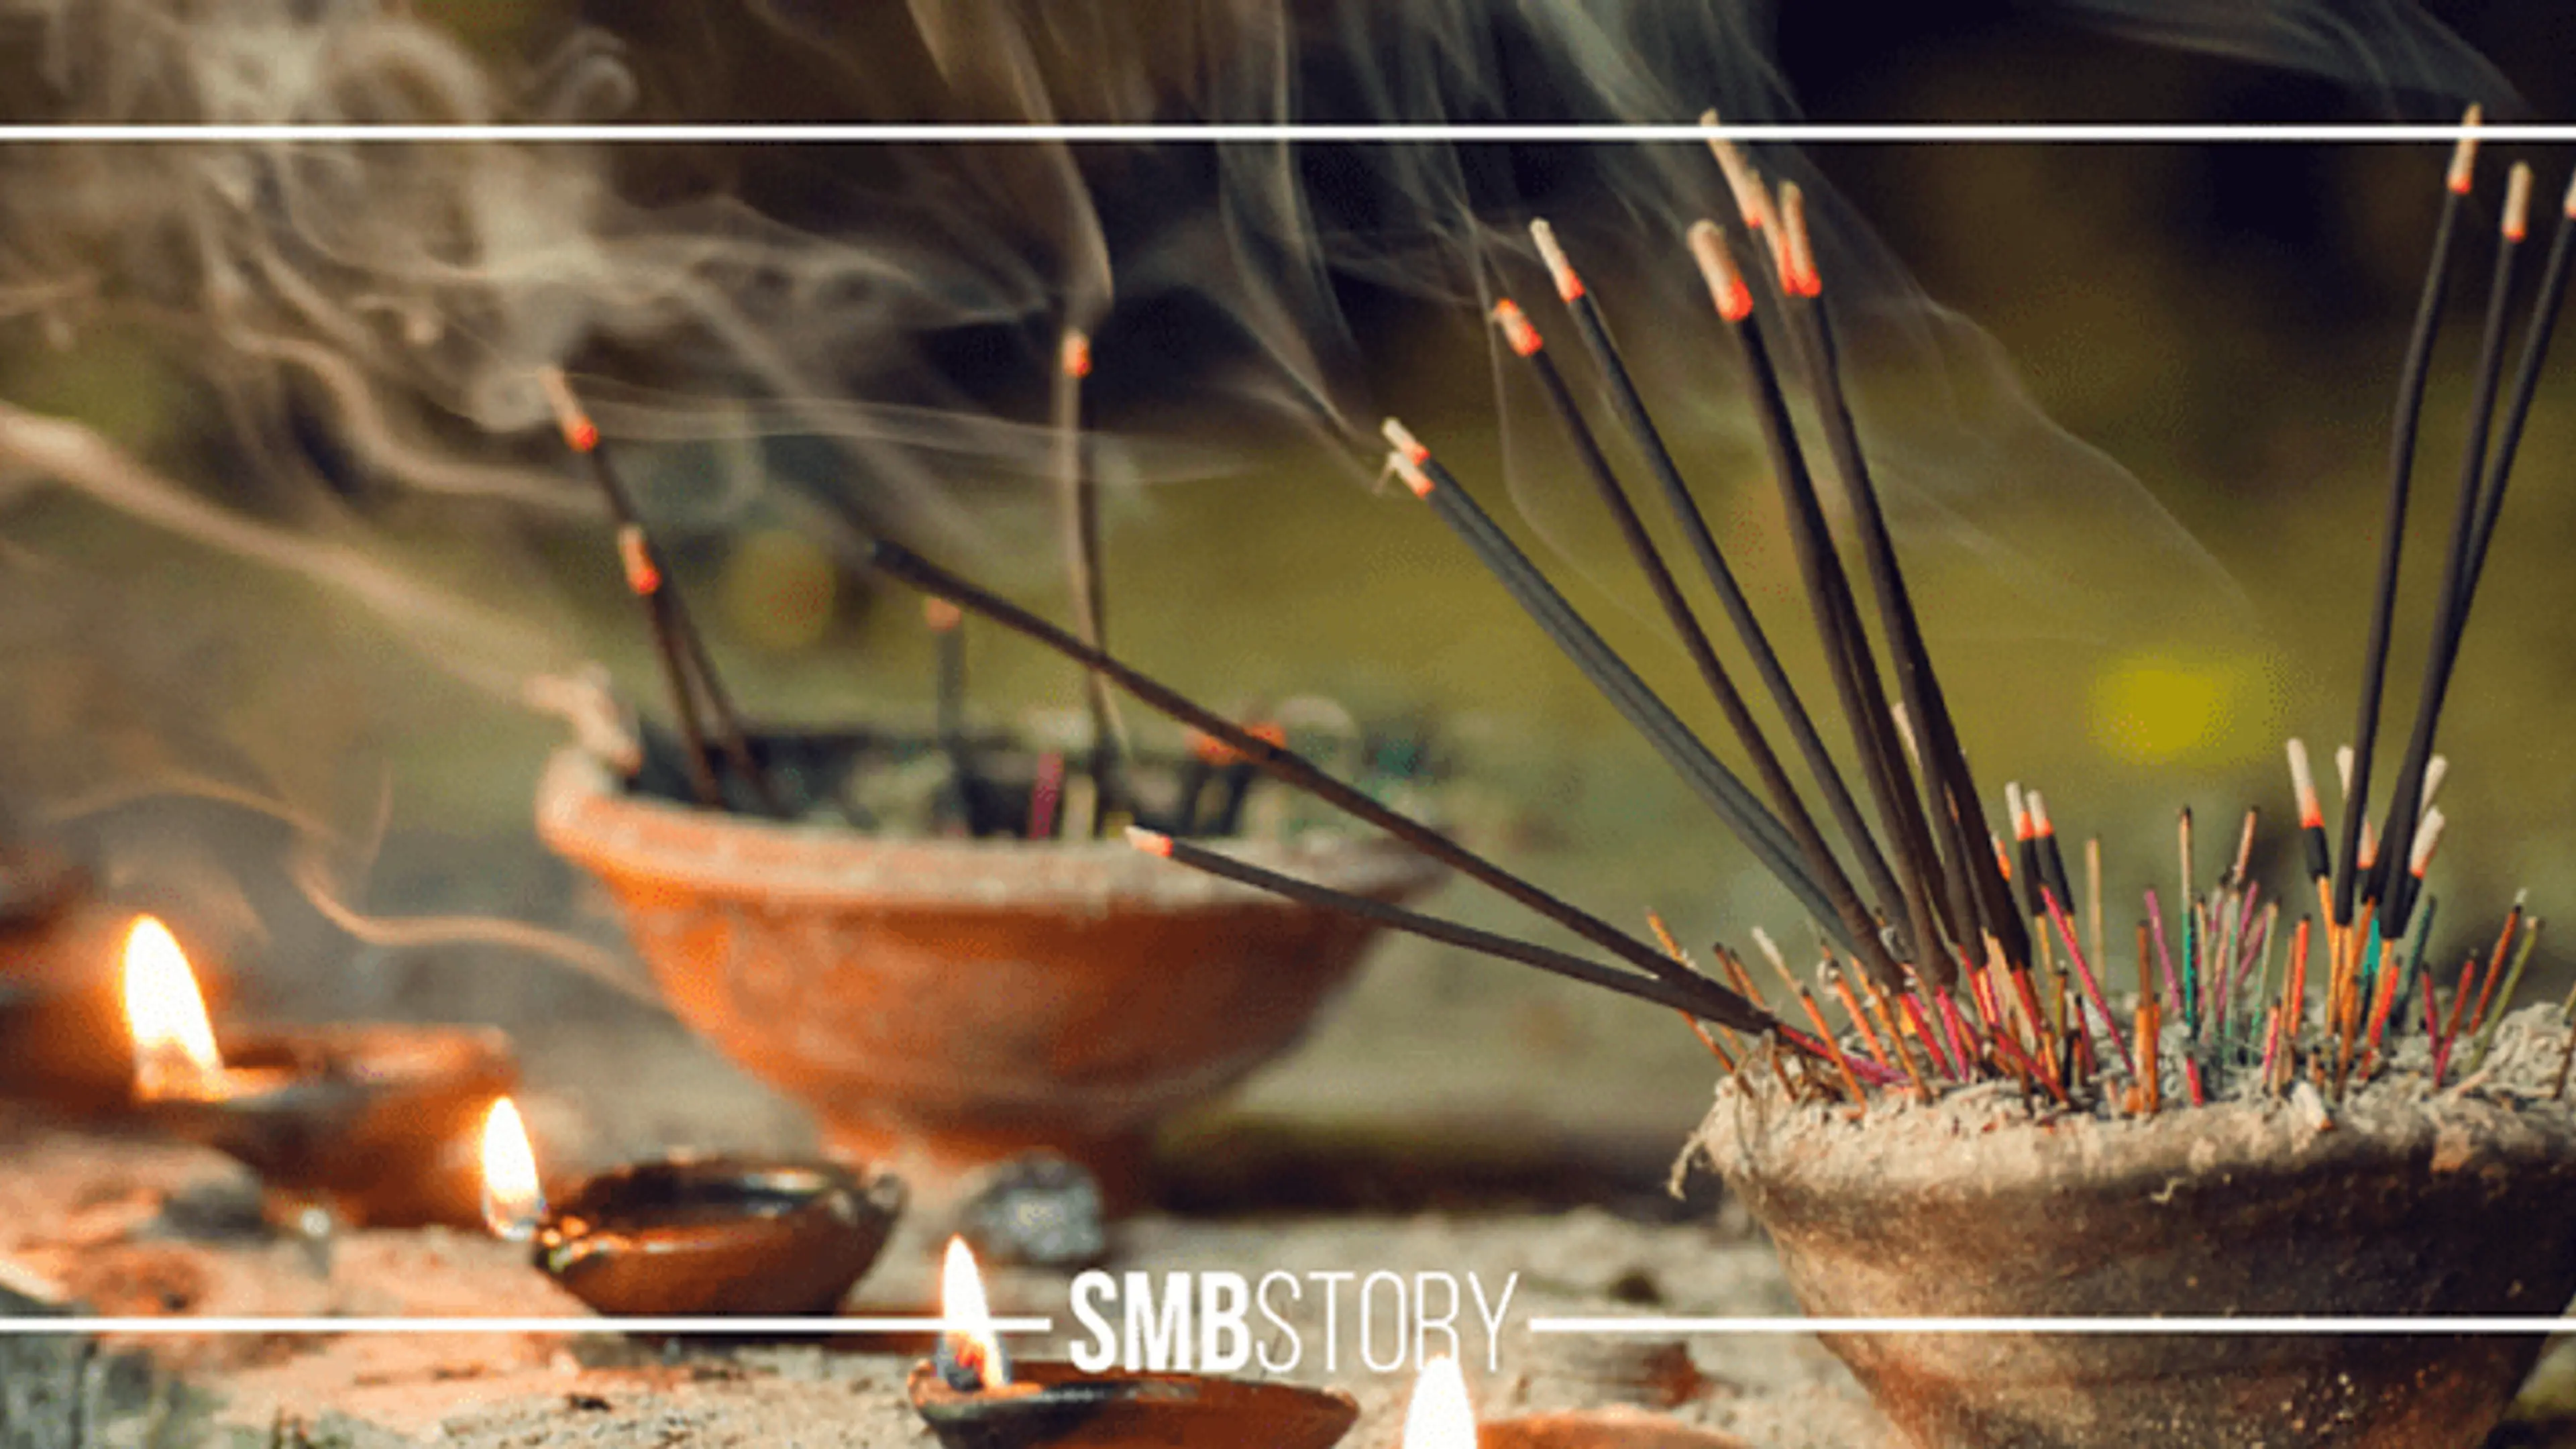 India’s self-reliant incense industry has wide global appeal
